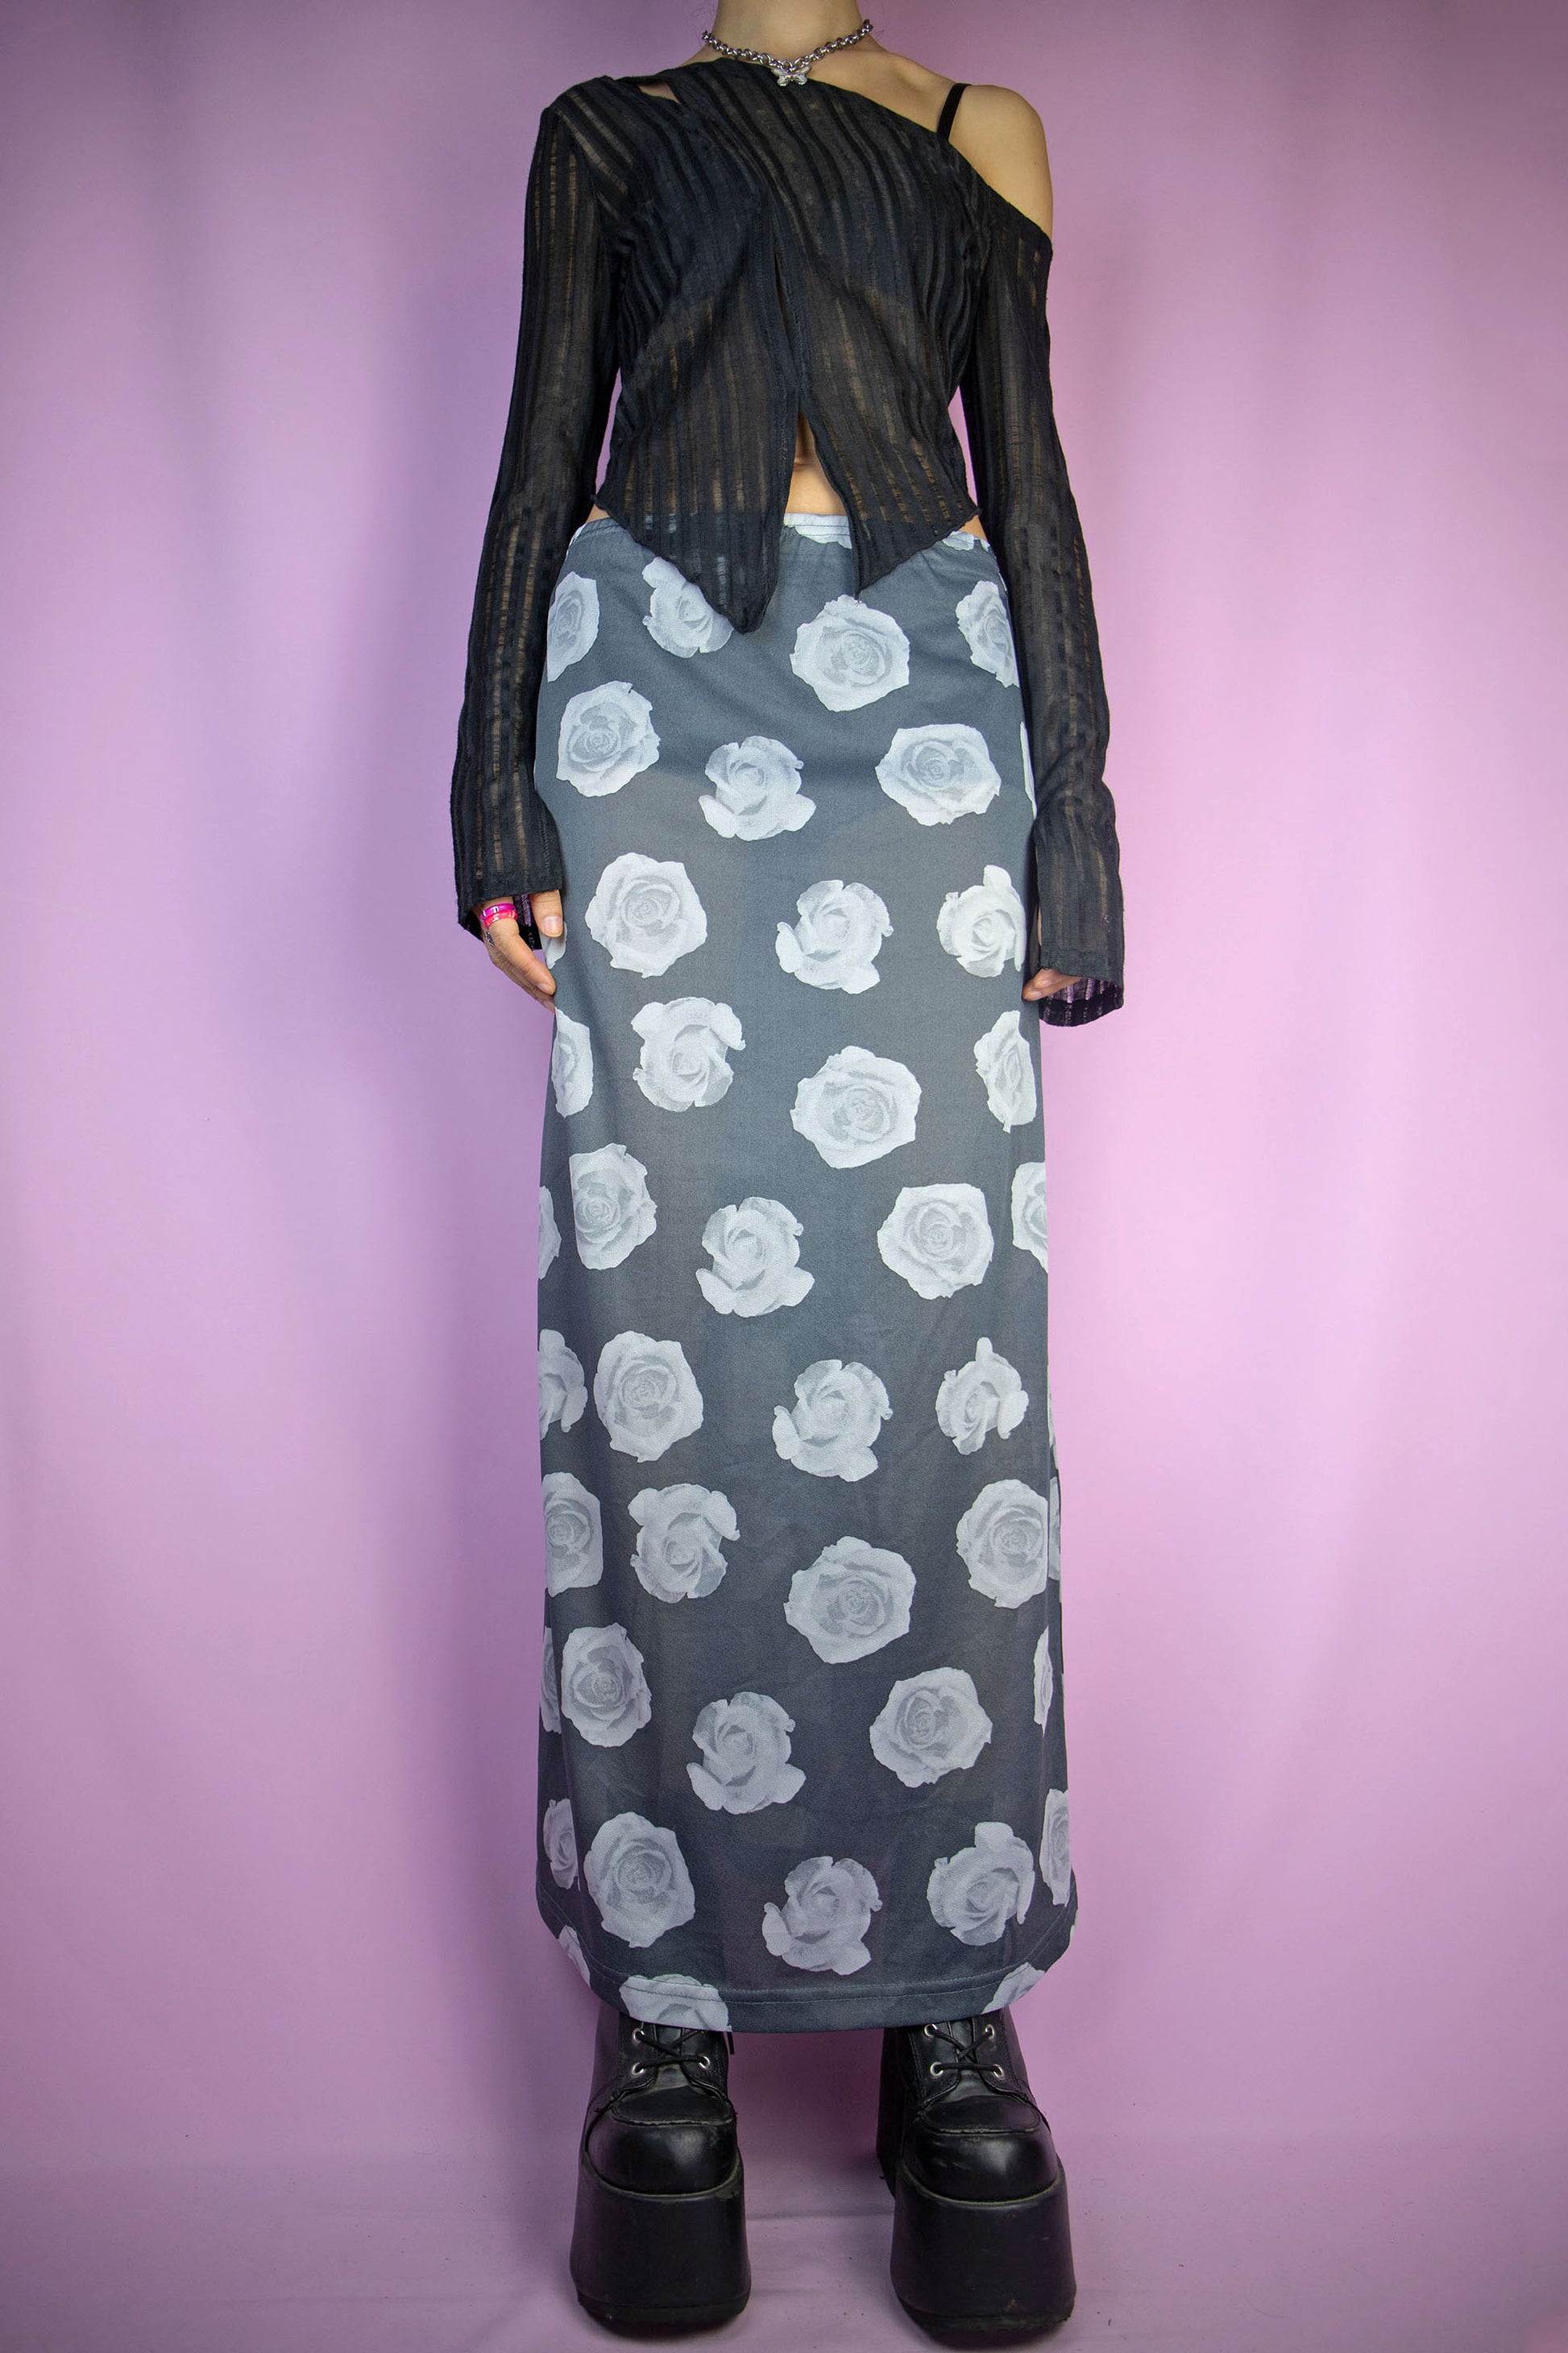 The Vintage 90’s Gray Sheer Maxi Skirt is a semi-sheer rose floral gray and white long skirt with an elasticated waist. Ideal for festivals, raves, and clubbing, this super cute fairy goth grunge-inspired summer beach maxi skirt embodies the style of the 1990s.